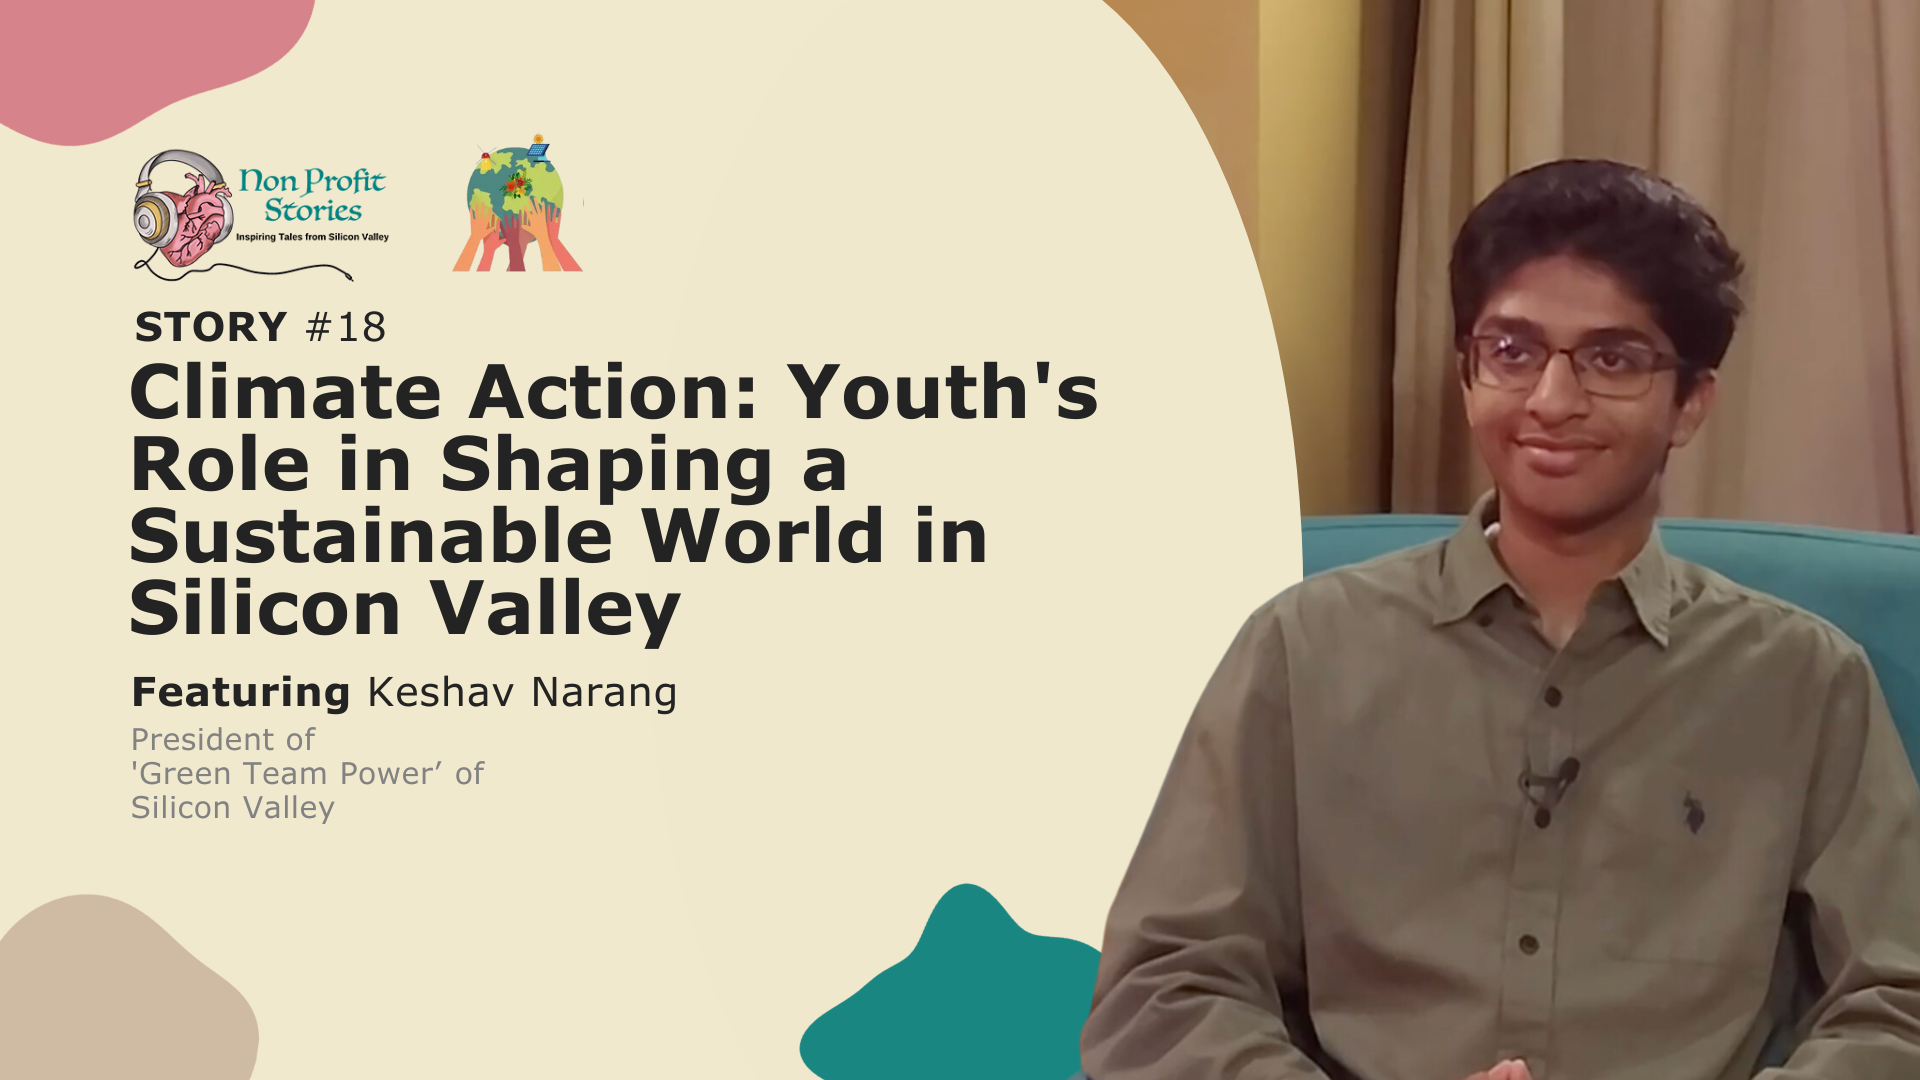 Climate Action: Youth’s Role in Shaping a Sustainable World in Silicon Valley